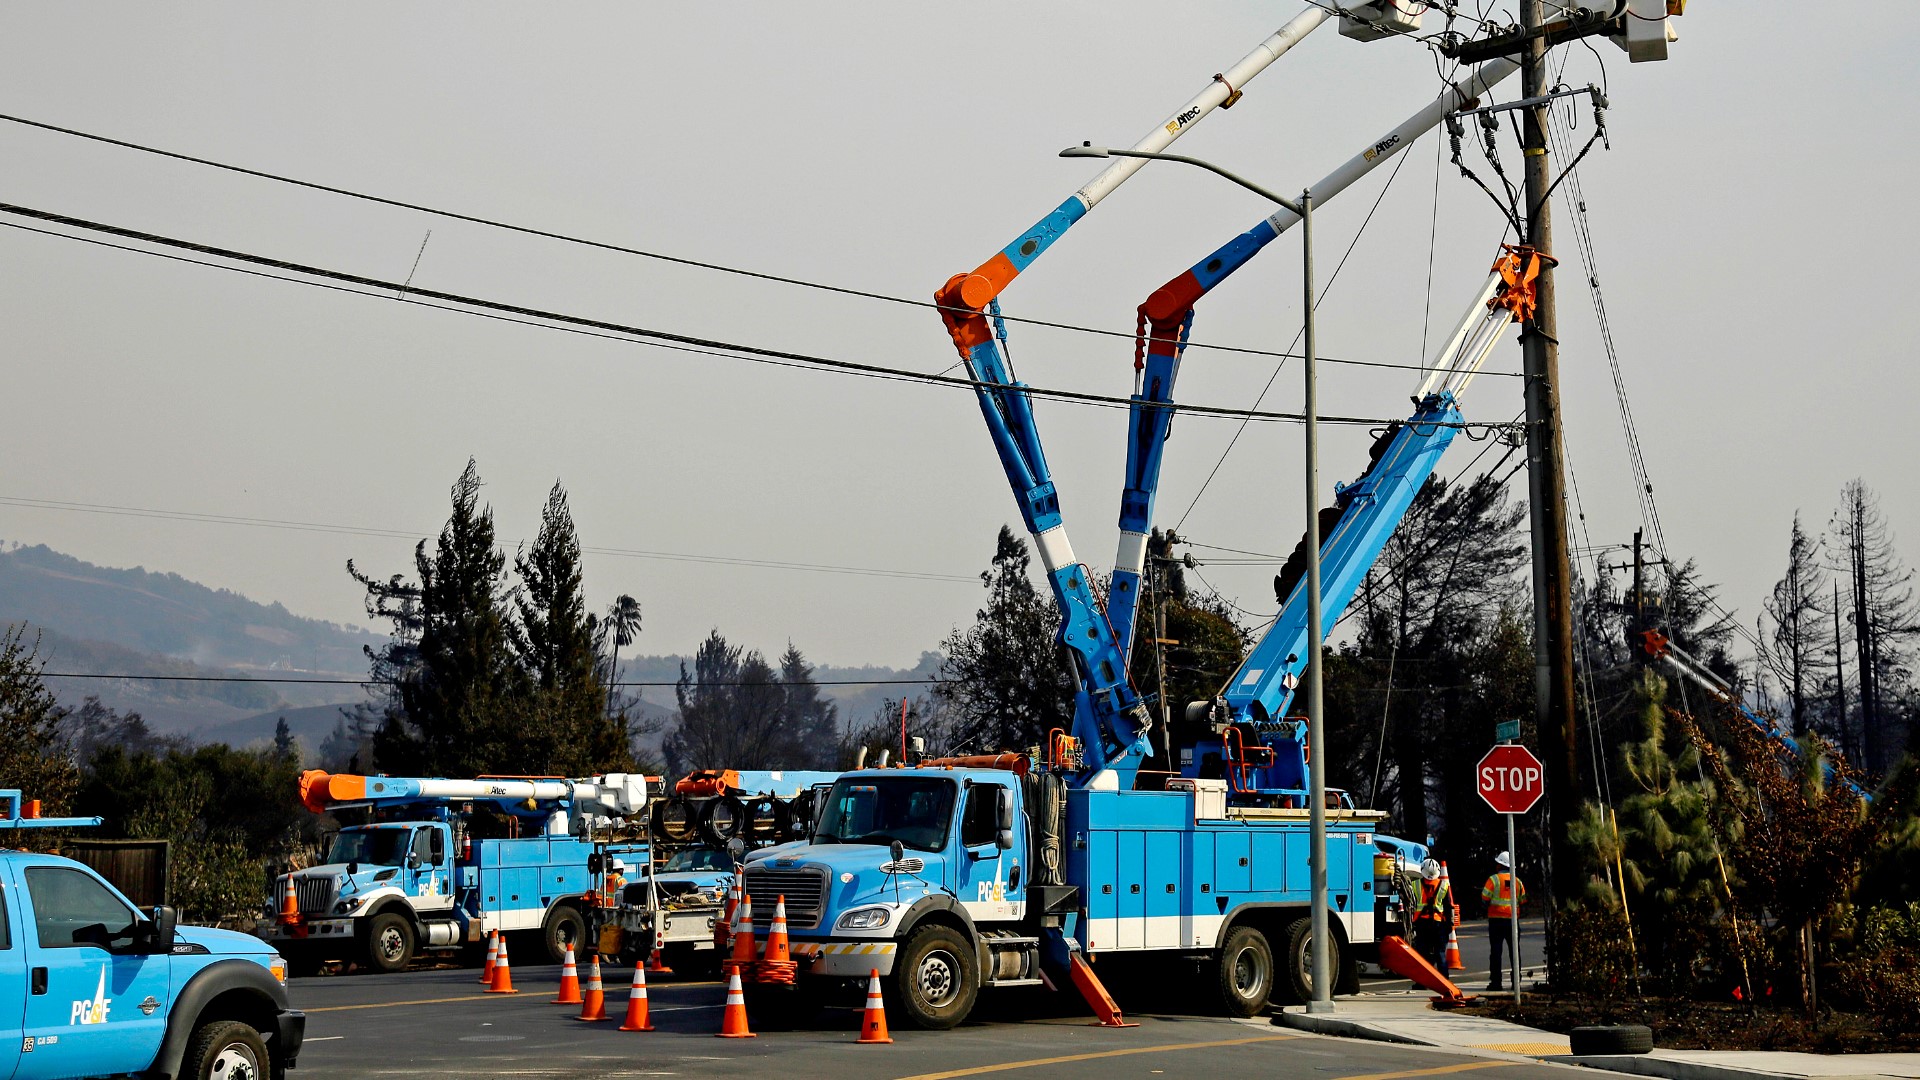 Mark Toney says PG&E needs to achieve safety in the most cost-effective manner.